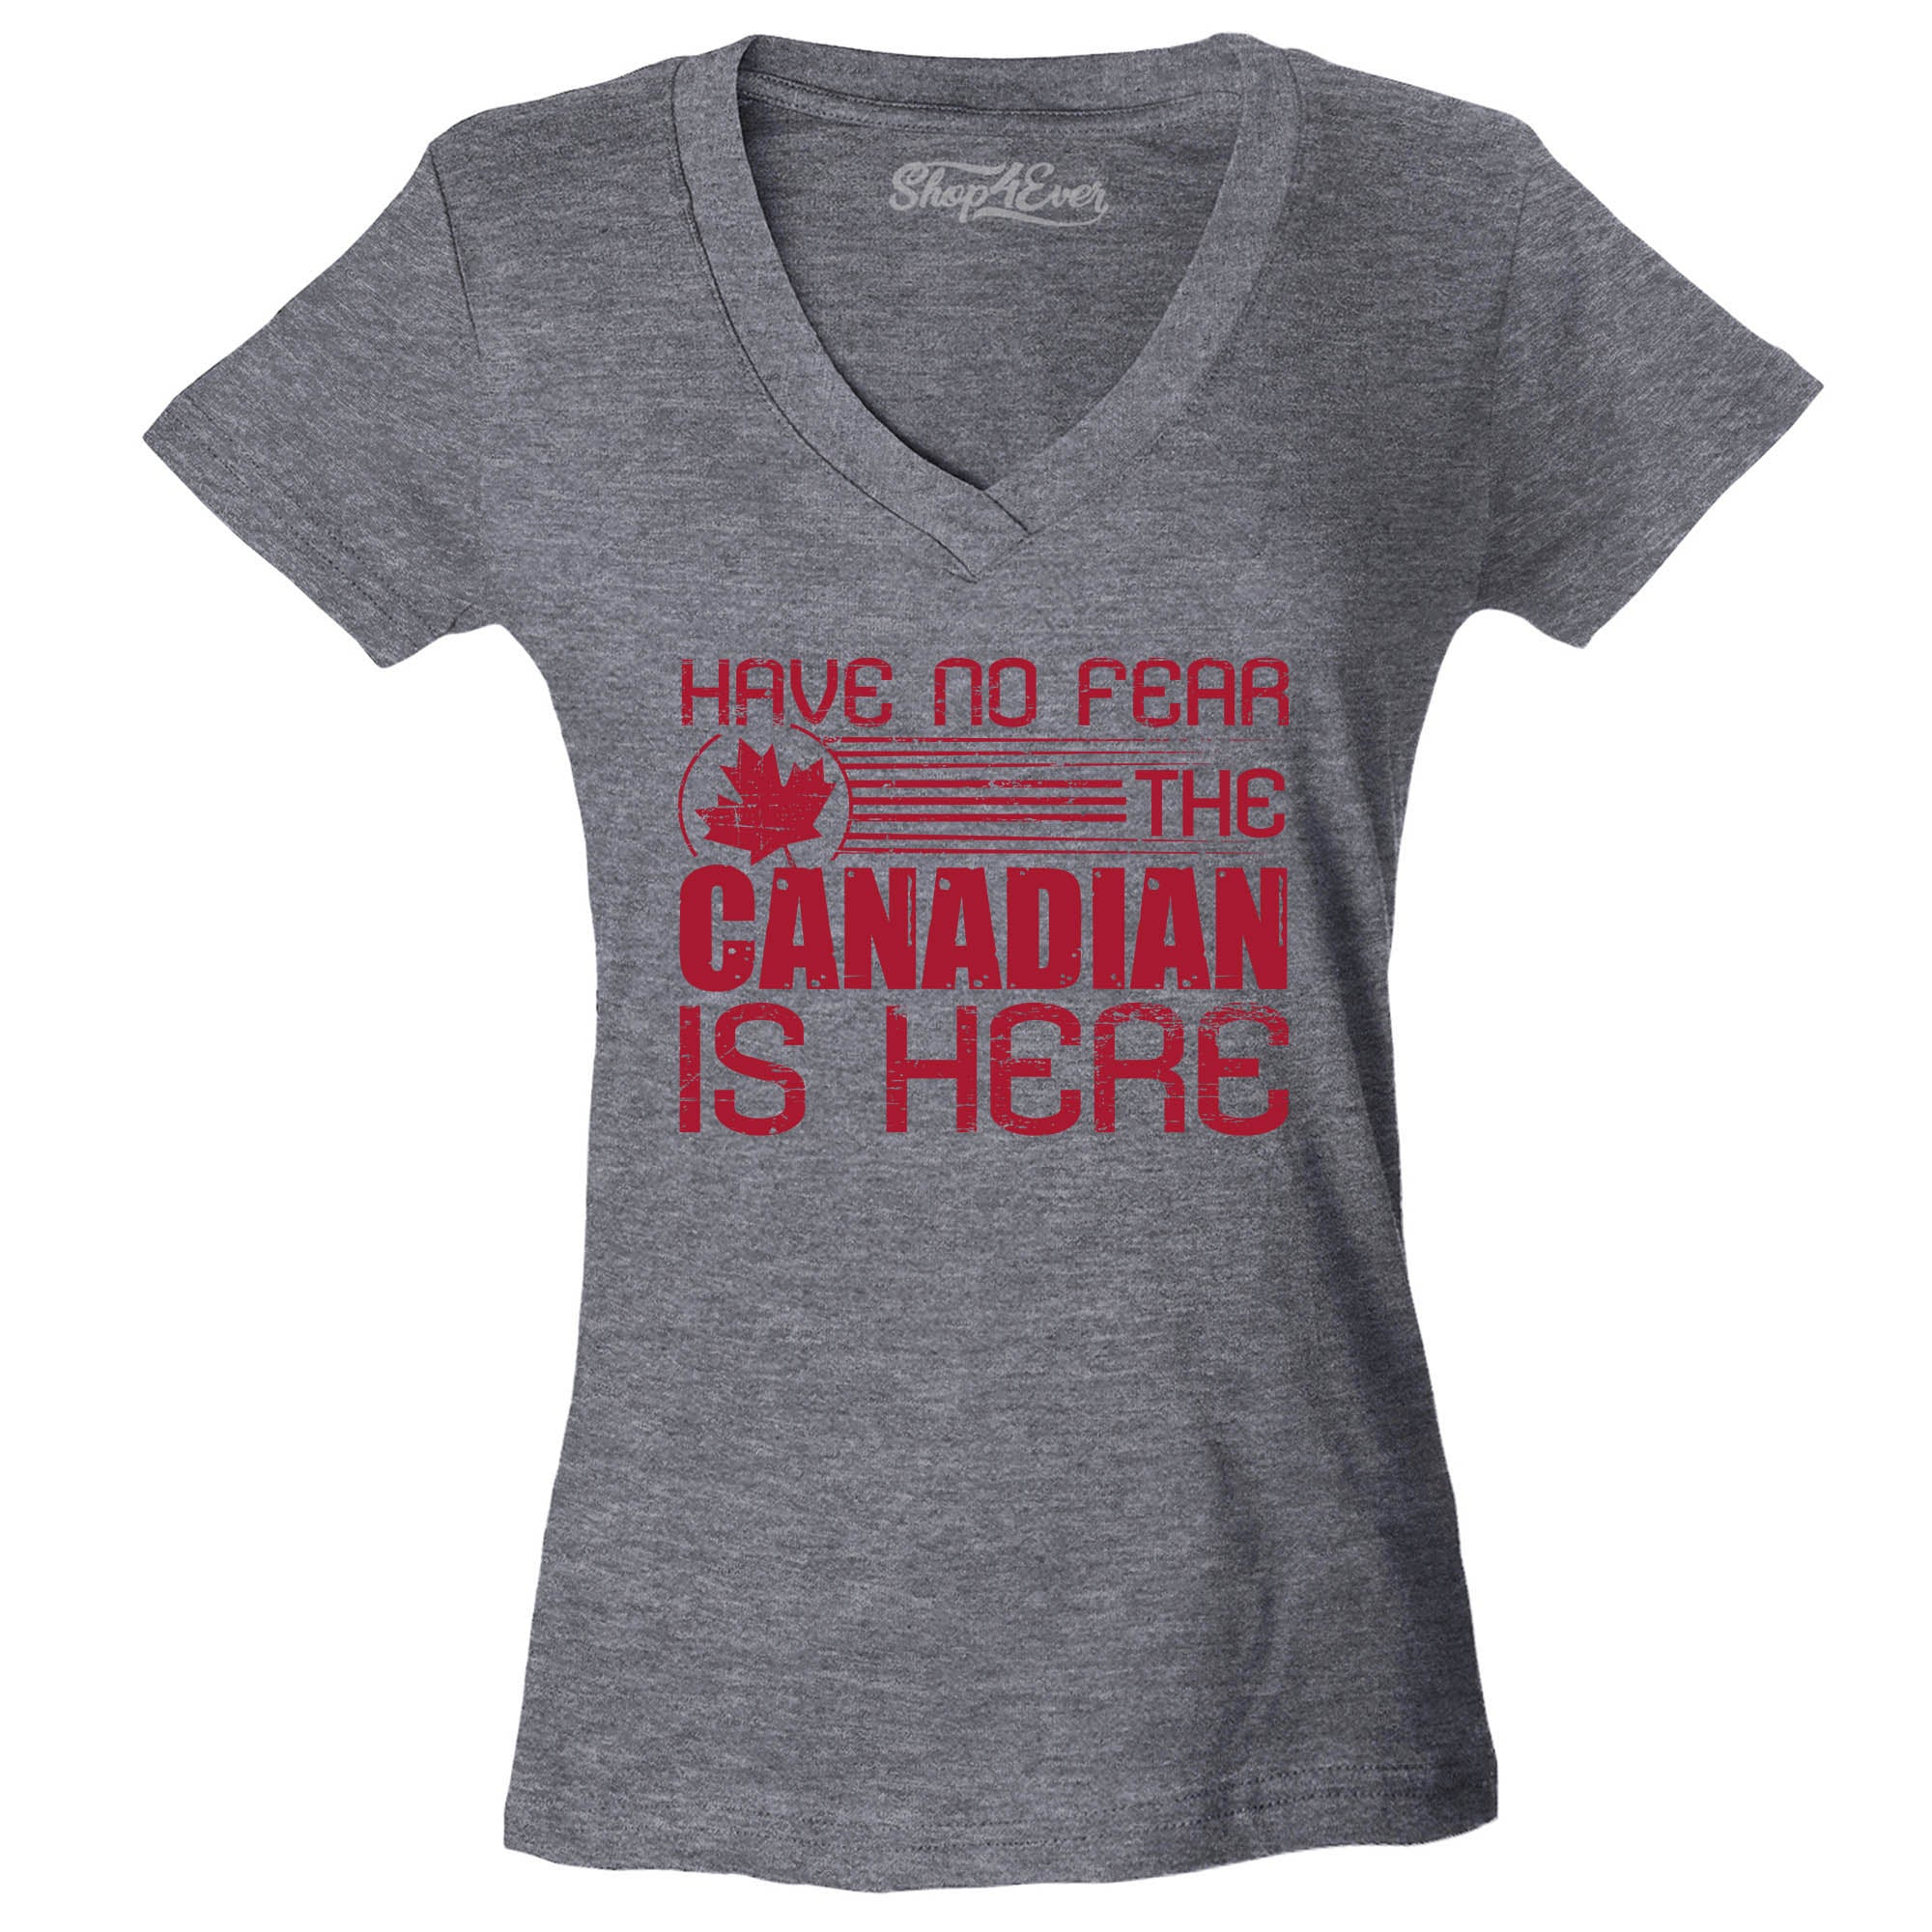 Have No Fear The Canadian is Here Canada Pride Women's V-Neck T-Shirt Slim Fit